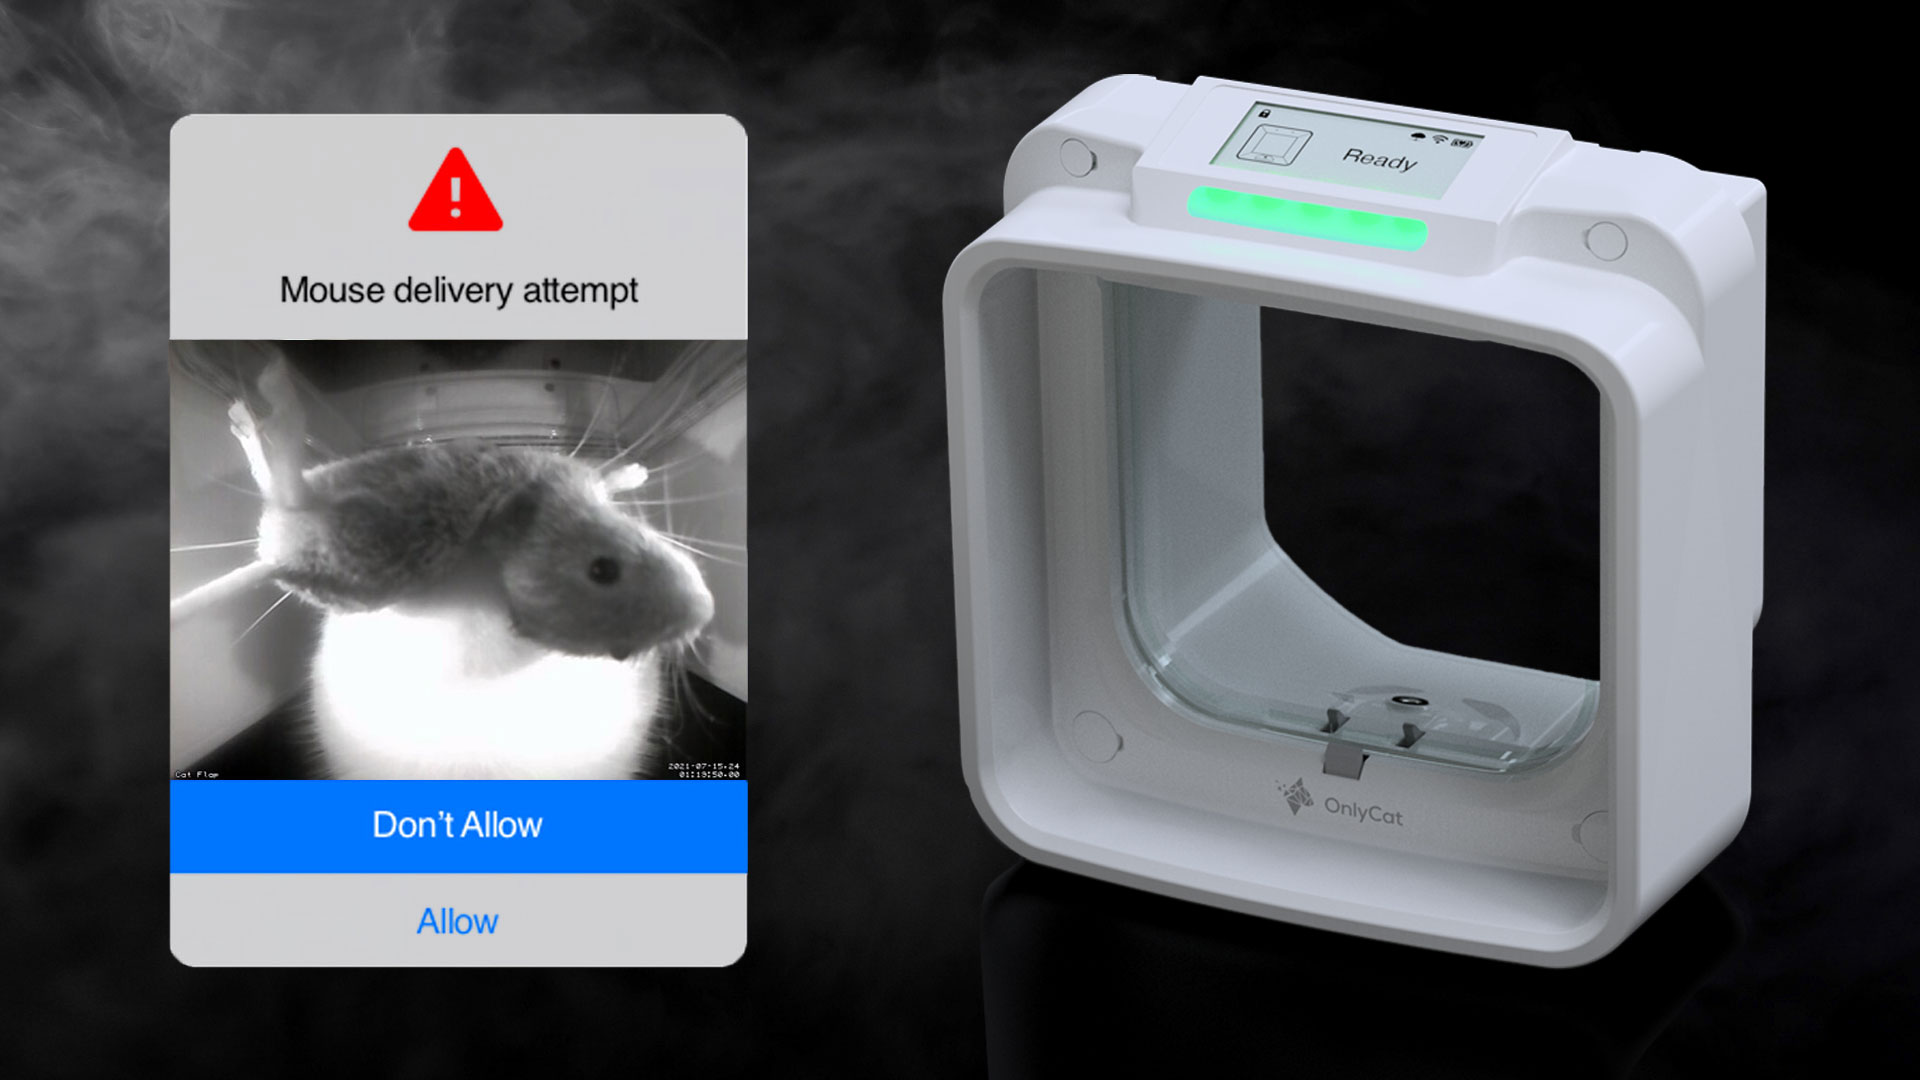 OnlyCat® - Let cats in. Keep mice out.